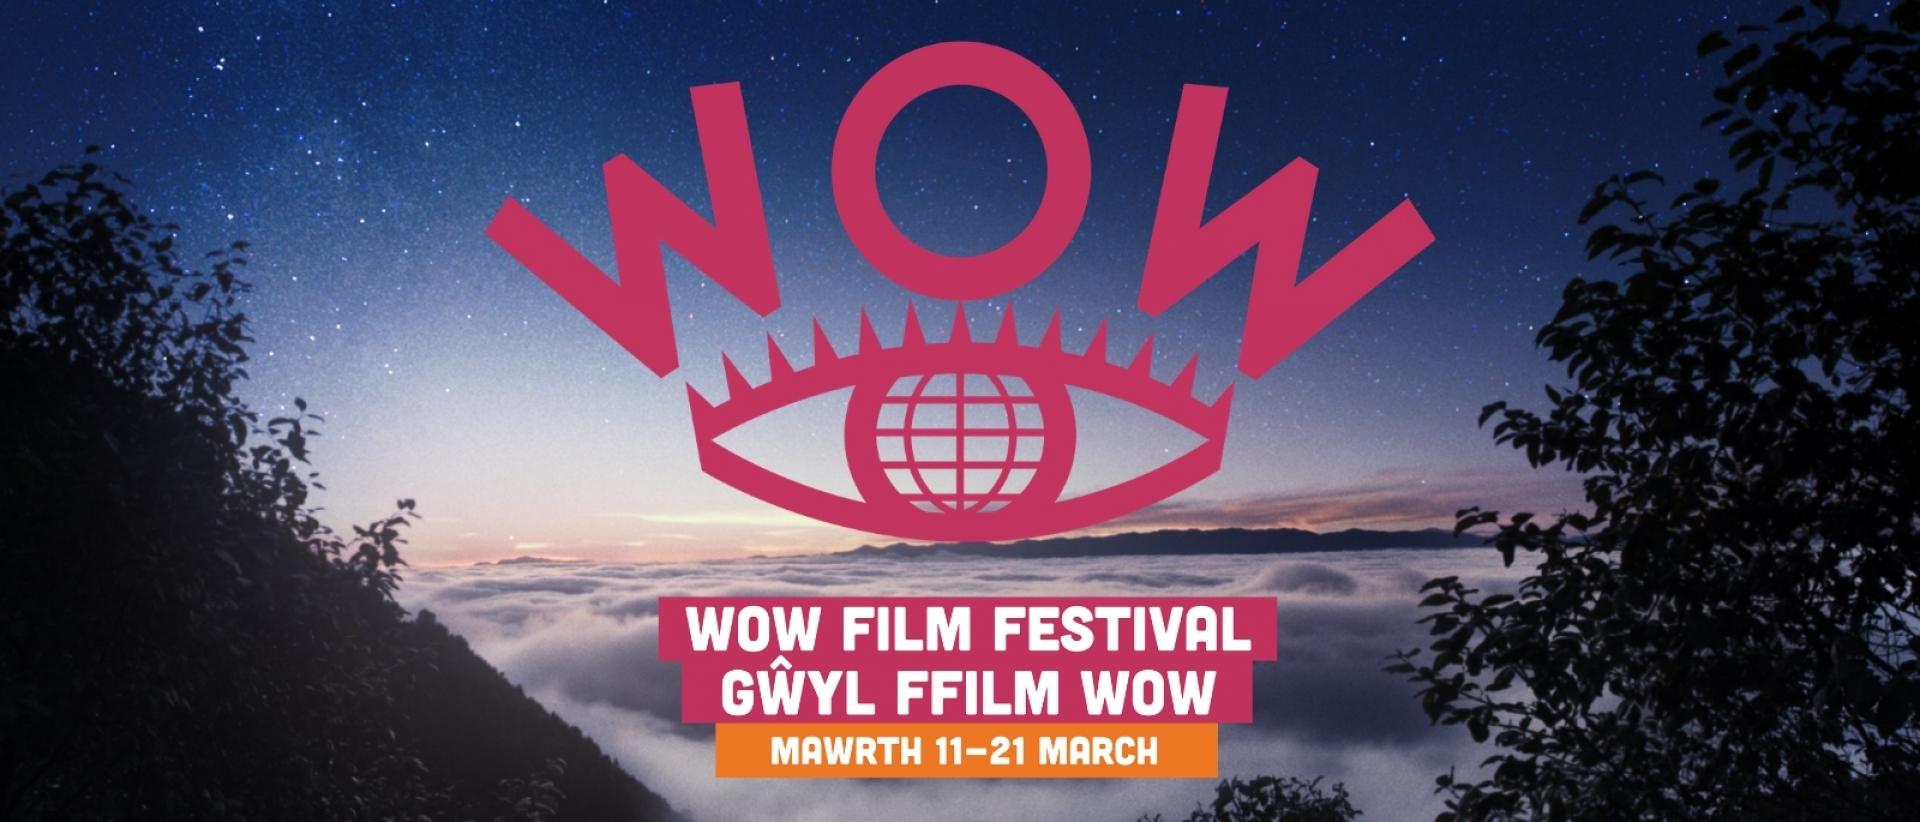 poster for wales on world film festival 2021